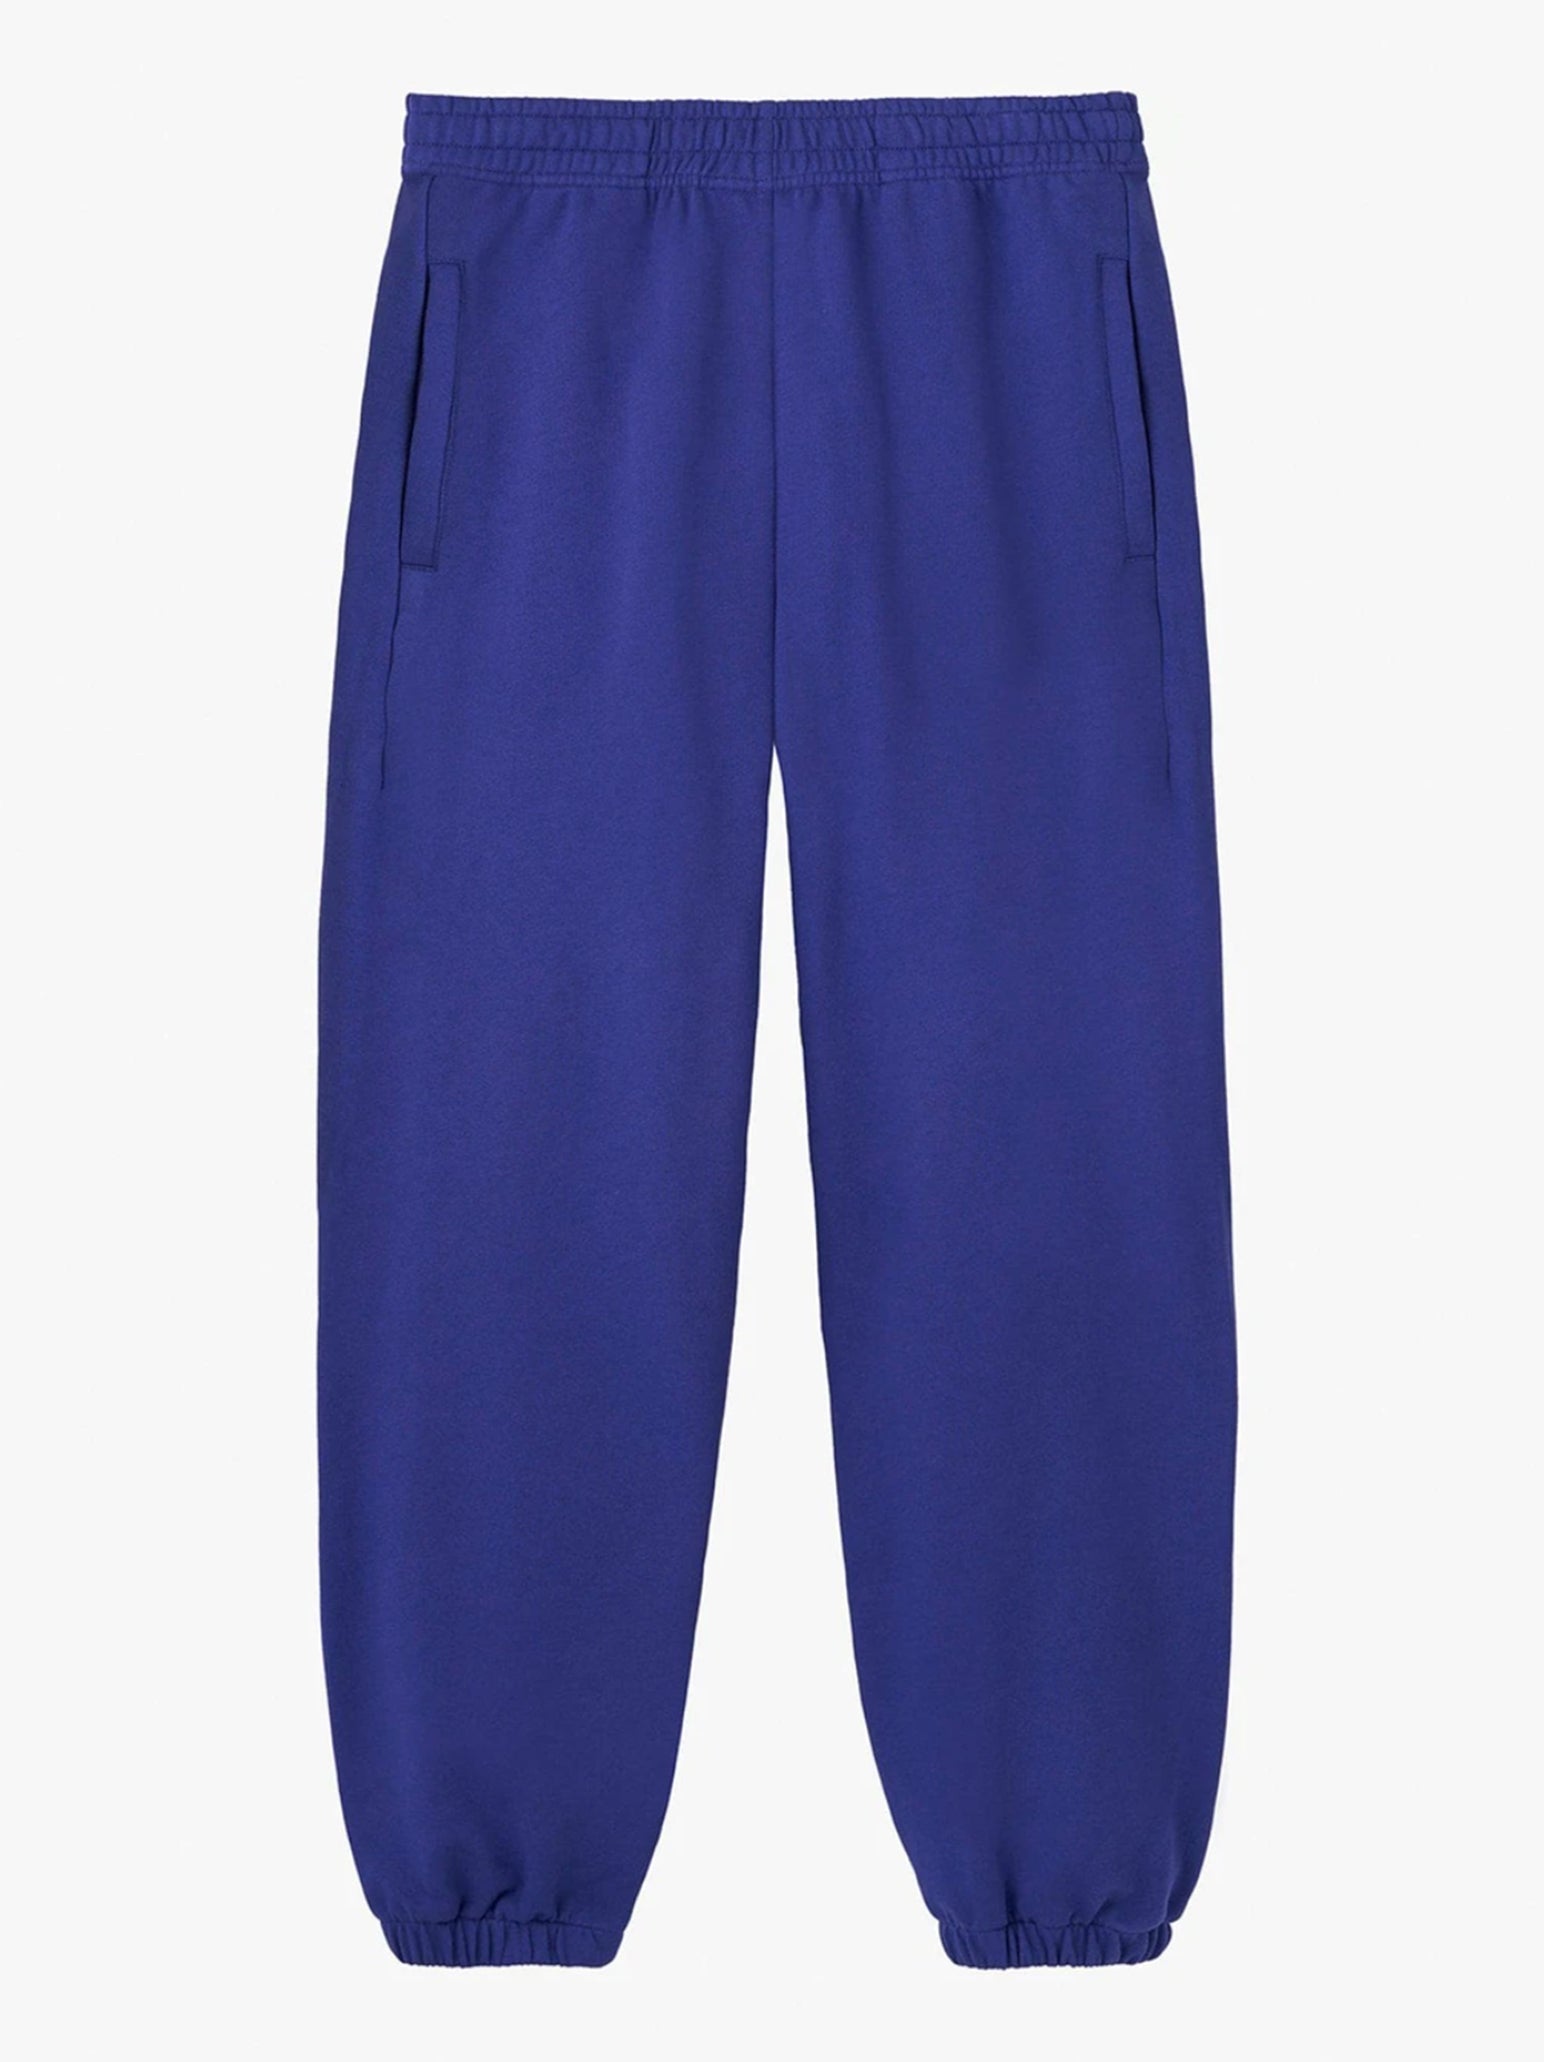 Les Girls Les Boys Loose Fit Track Pants in Spectrum Blue – Order Of Style